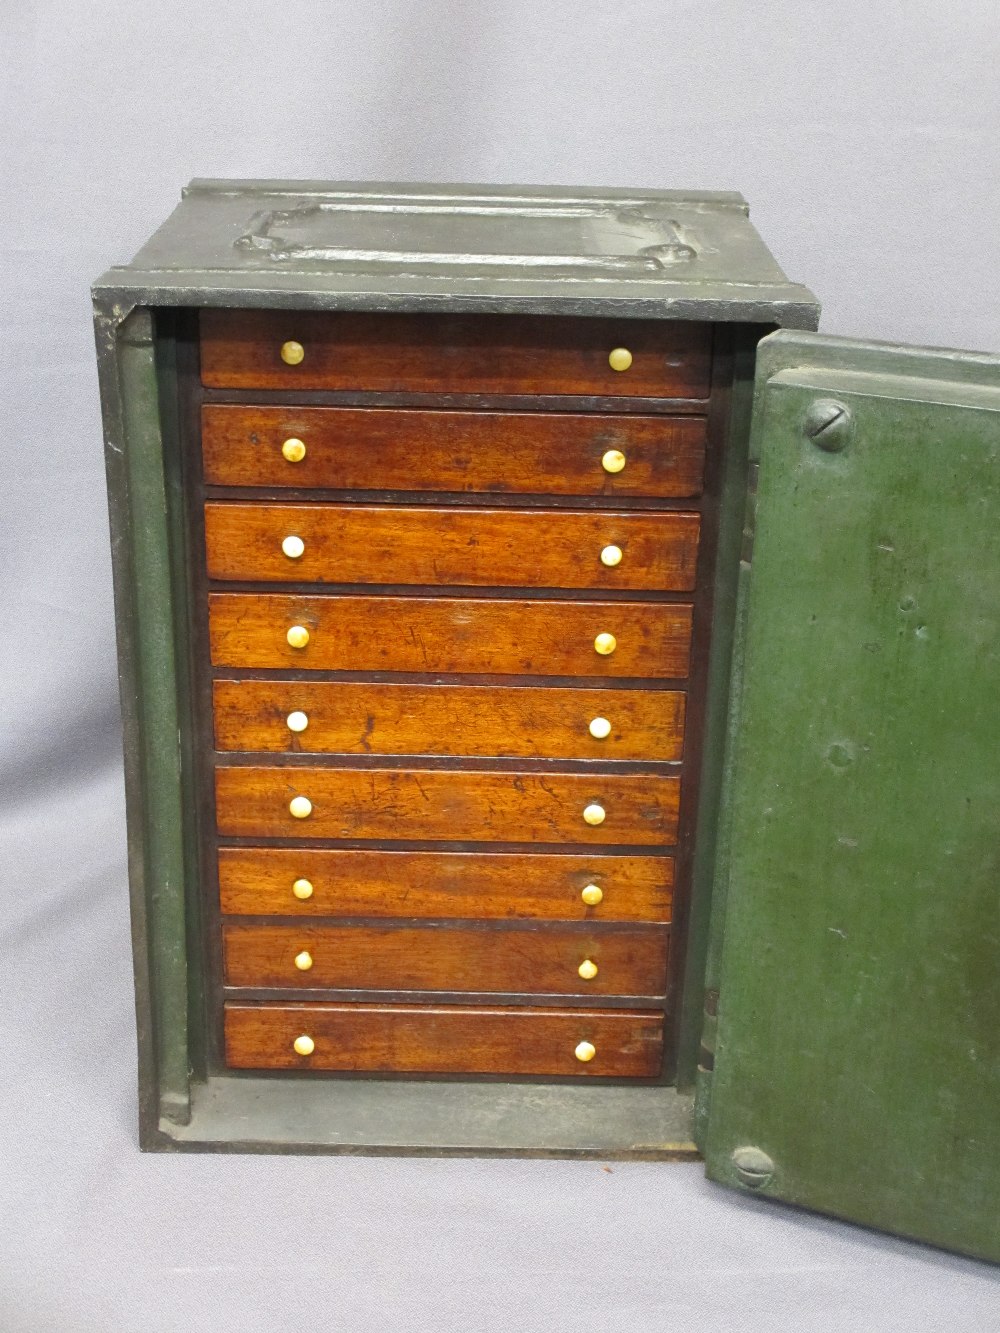 VINTAGE CAST IRON SAFE with key, the door opening to reveal nine interior mahogany drawers with bone - Image 2 of 3